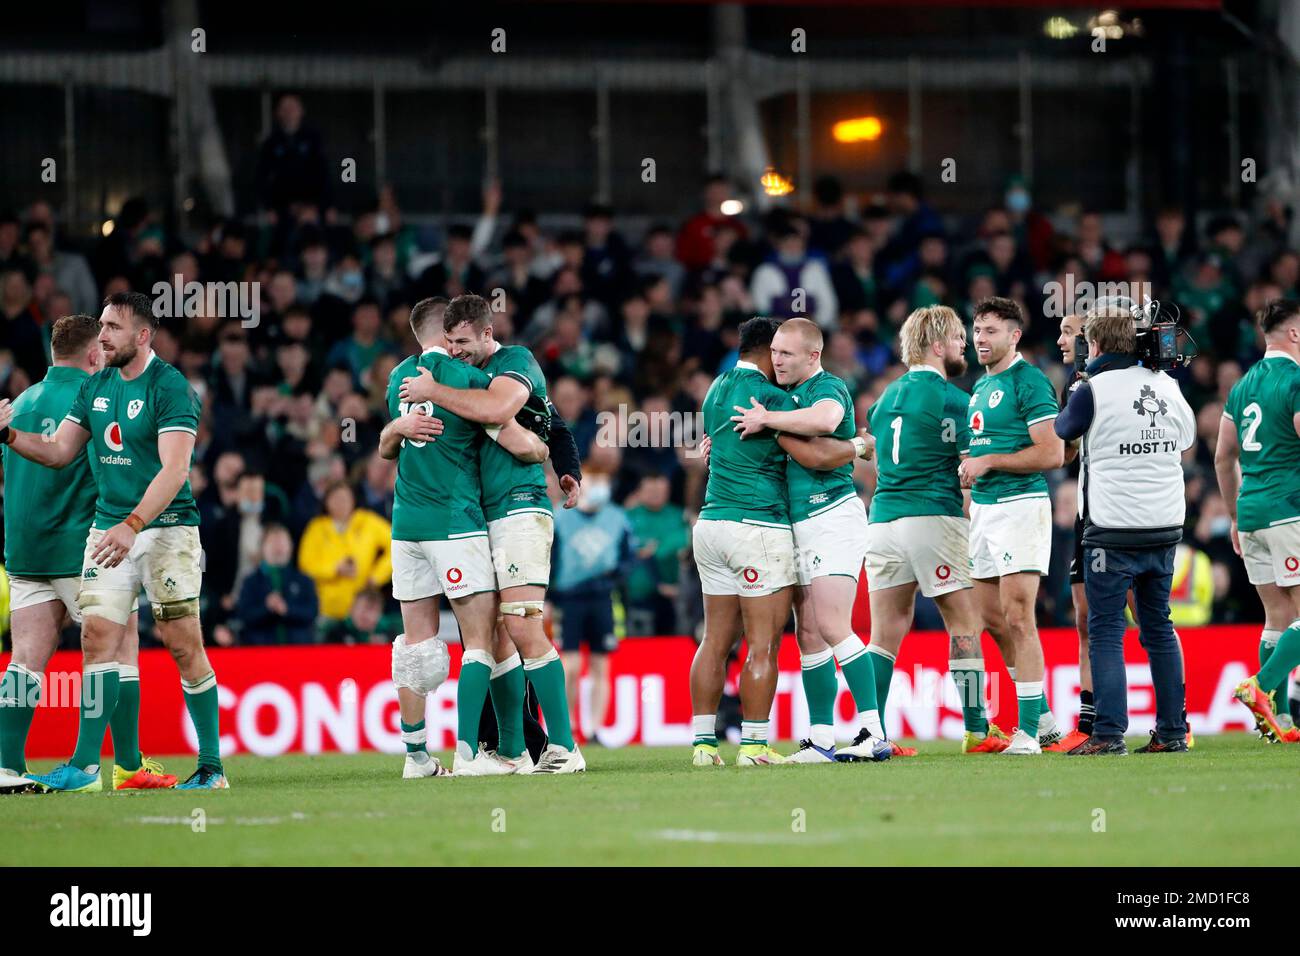 Ireland players celebrate their 29-20 victory over New Zealand in the international rugby union match